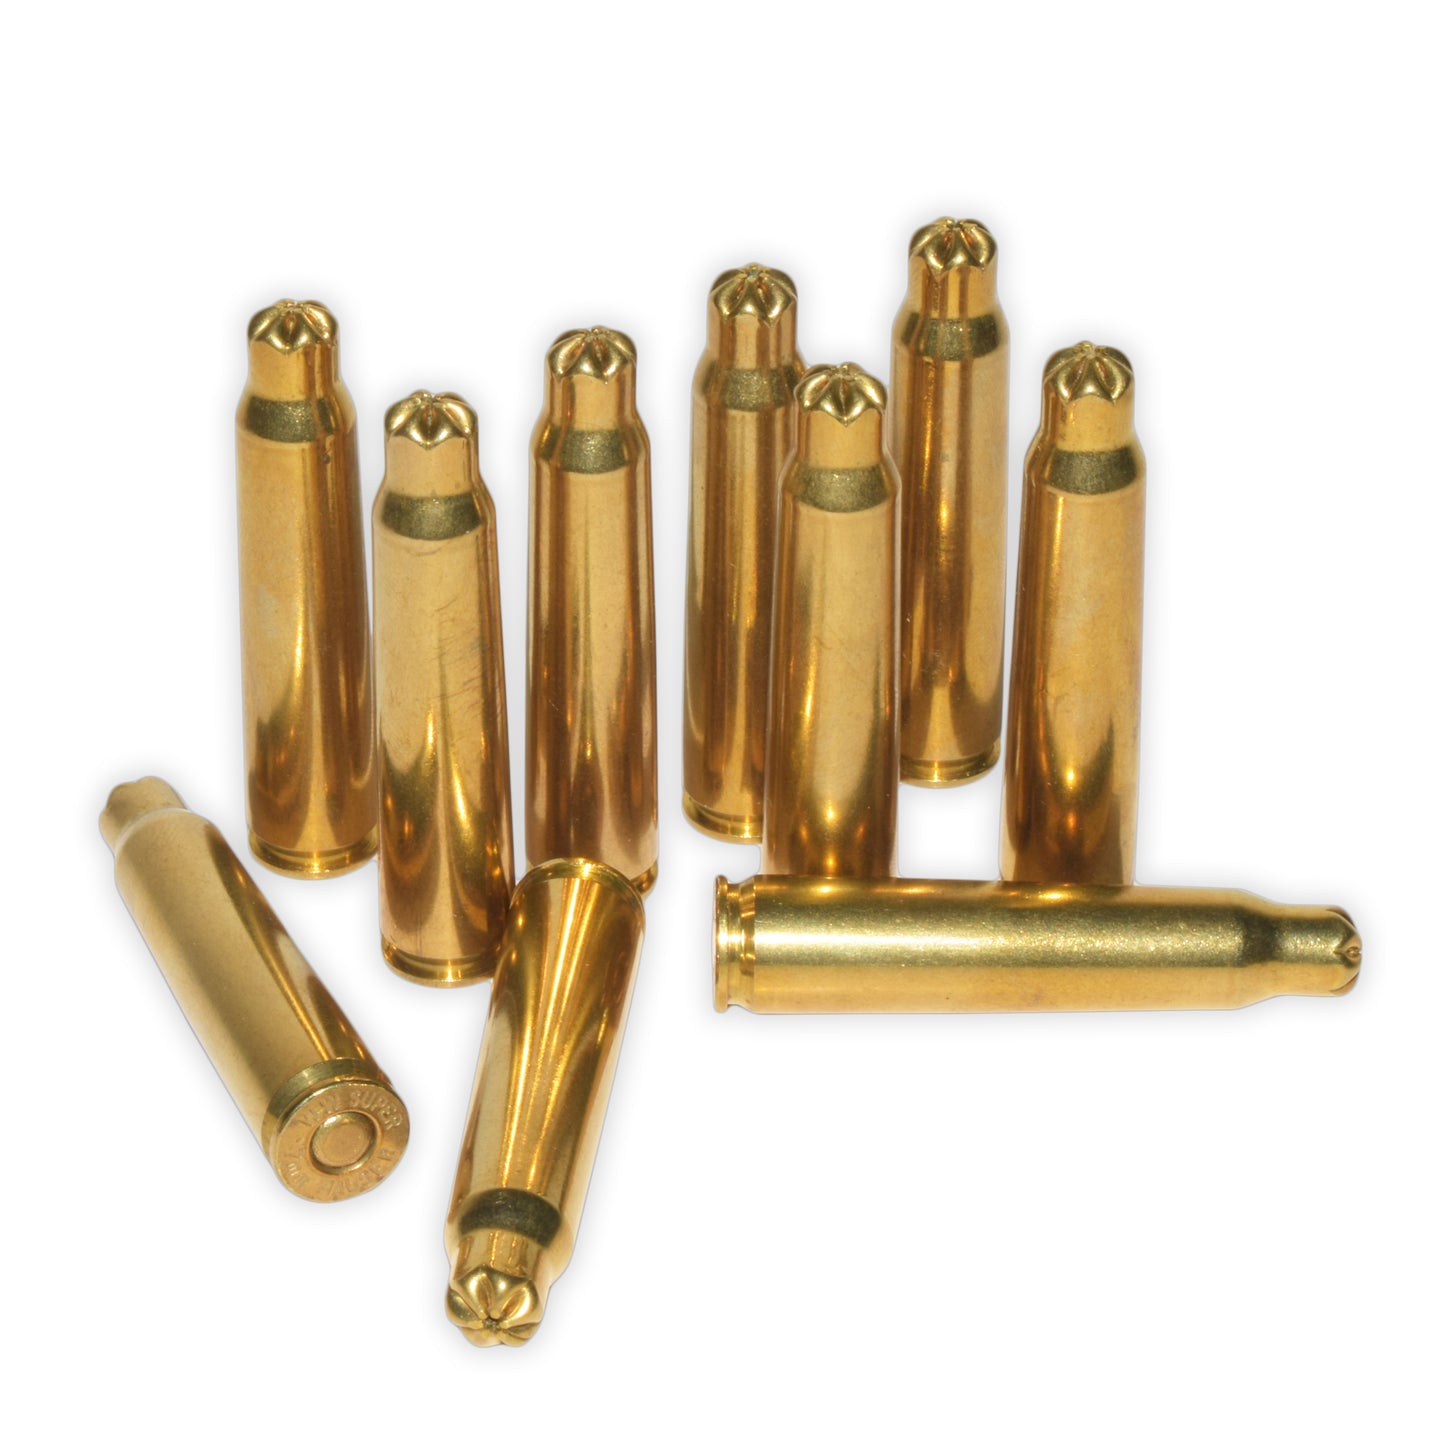 Military Ammo Blanks 7mm x 57 Mauser (25)